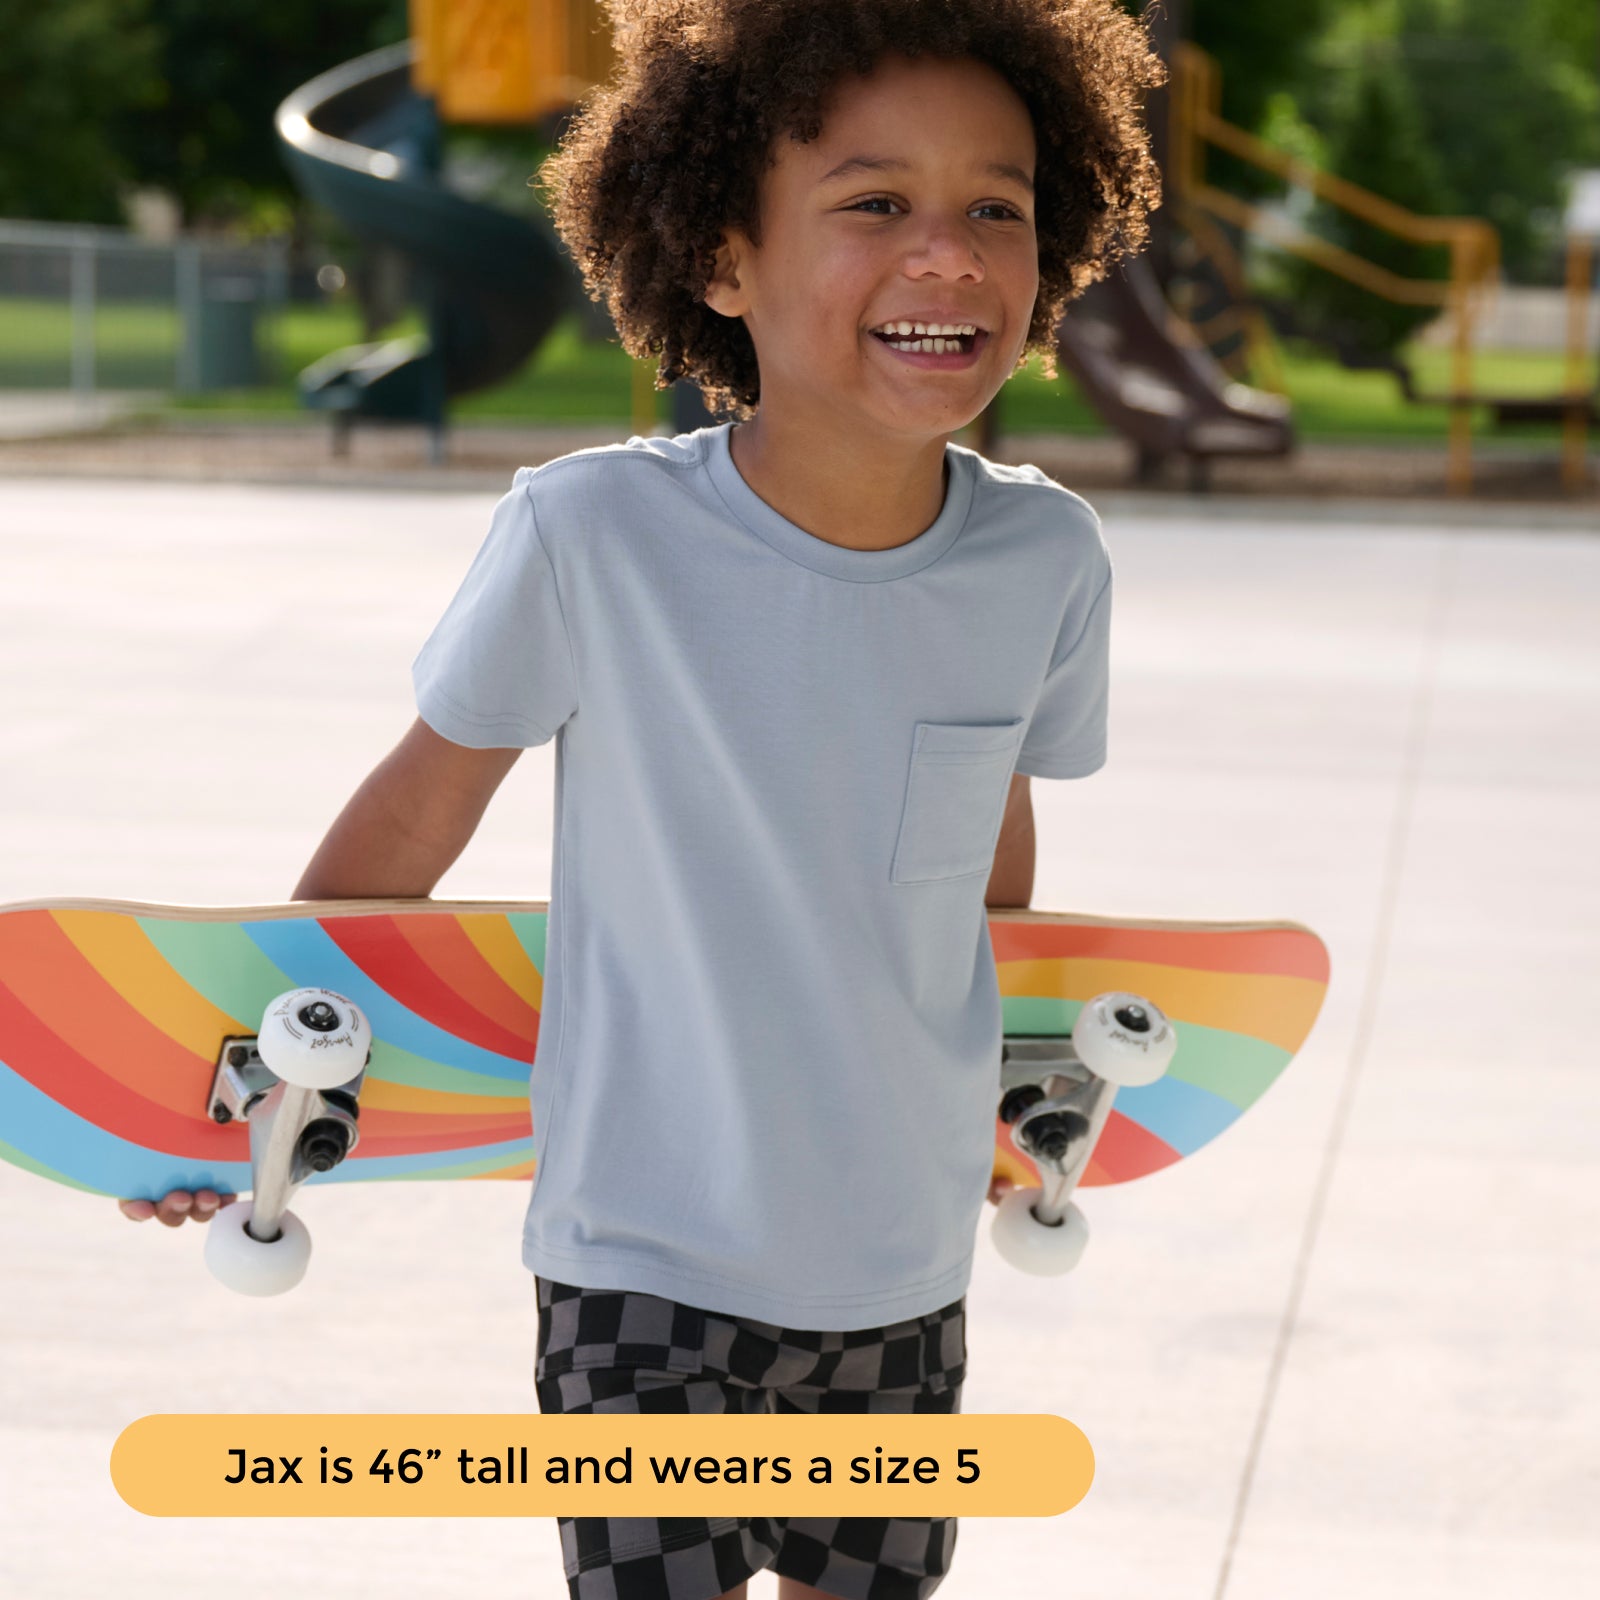 Boy holding skateboard and wearing the Fog Relaxed Short Sleeve Relaxed Pocket Tee and Monochrome Checker Shorts 